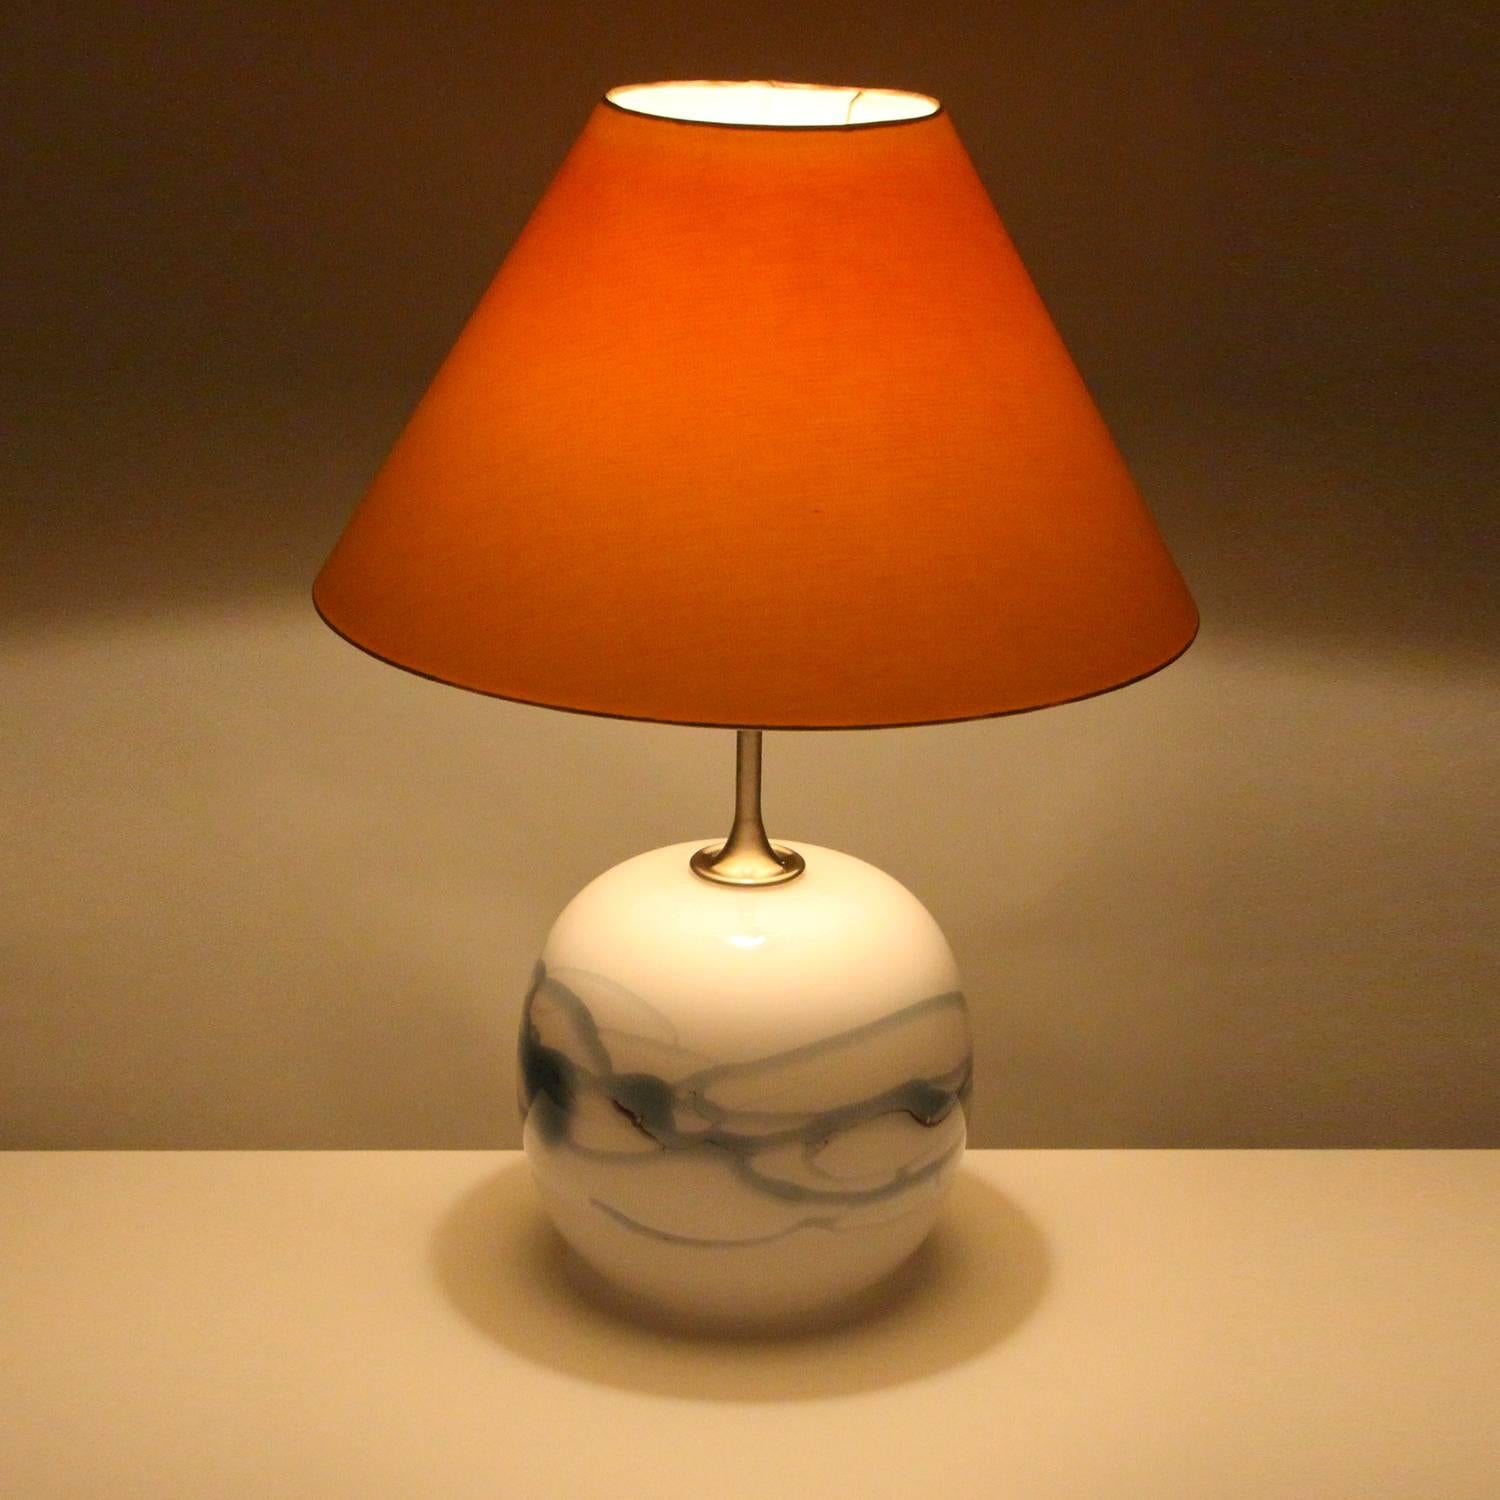 Sakura, Large Blown Glass Table Lamp by Michael Bang, Holmegaard, 1980 In Excellent Condition For Sale In Frederiksberg, DK